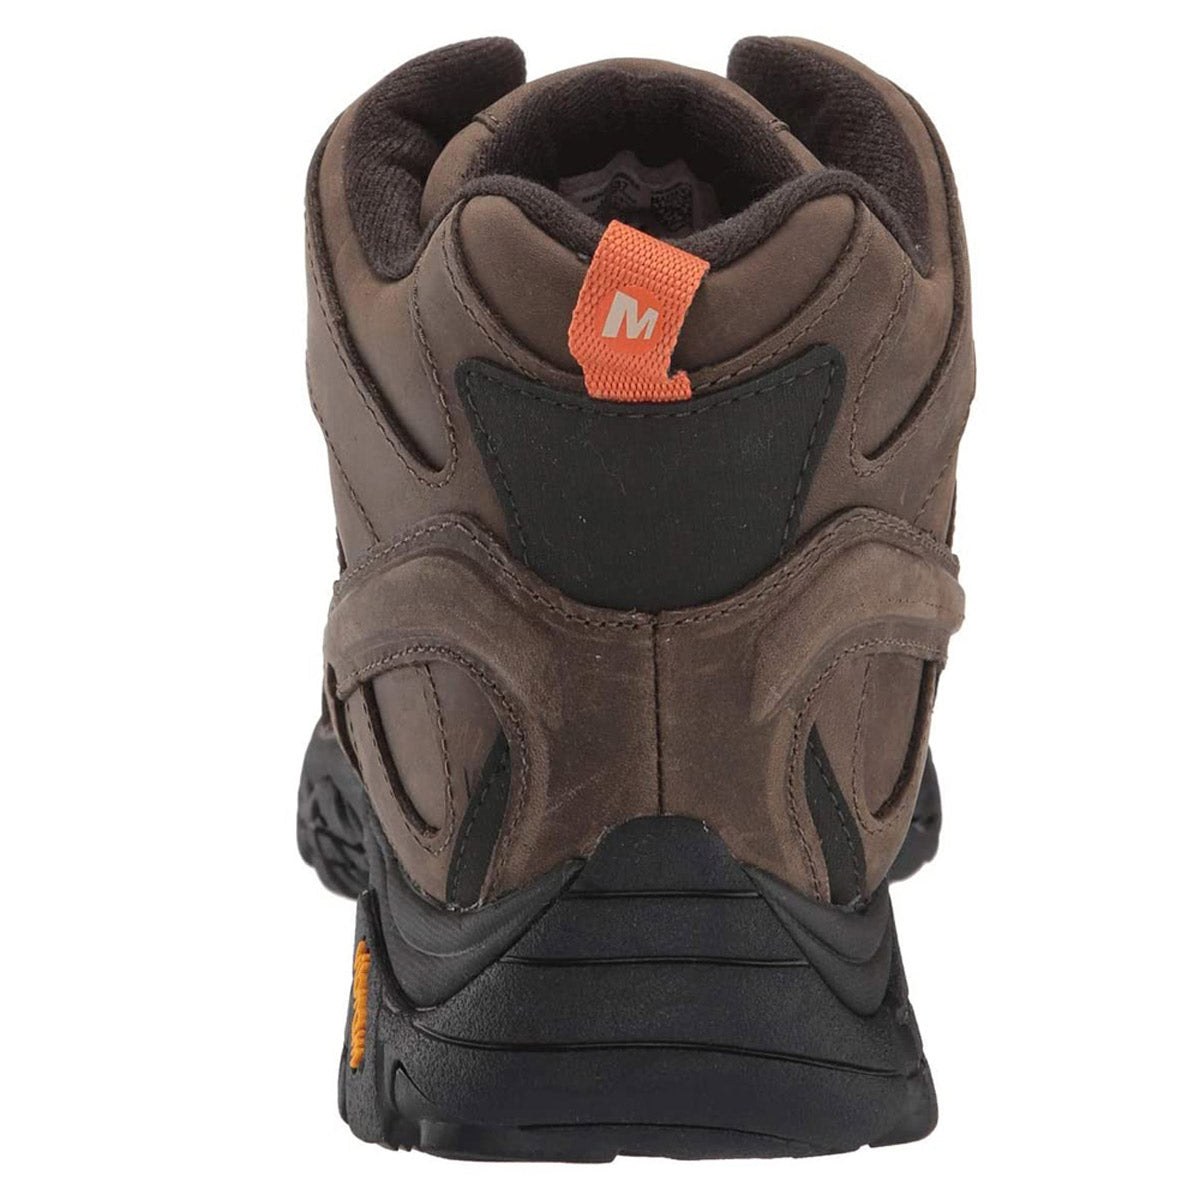 MERRELL MOAB 2 PRIME MID WP CANTEEN BROWN - MENS